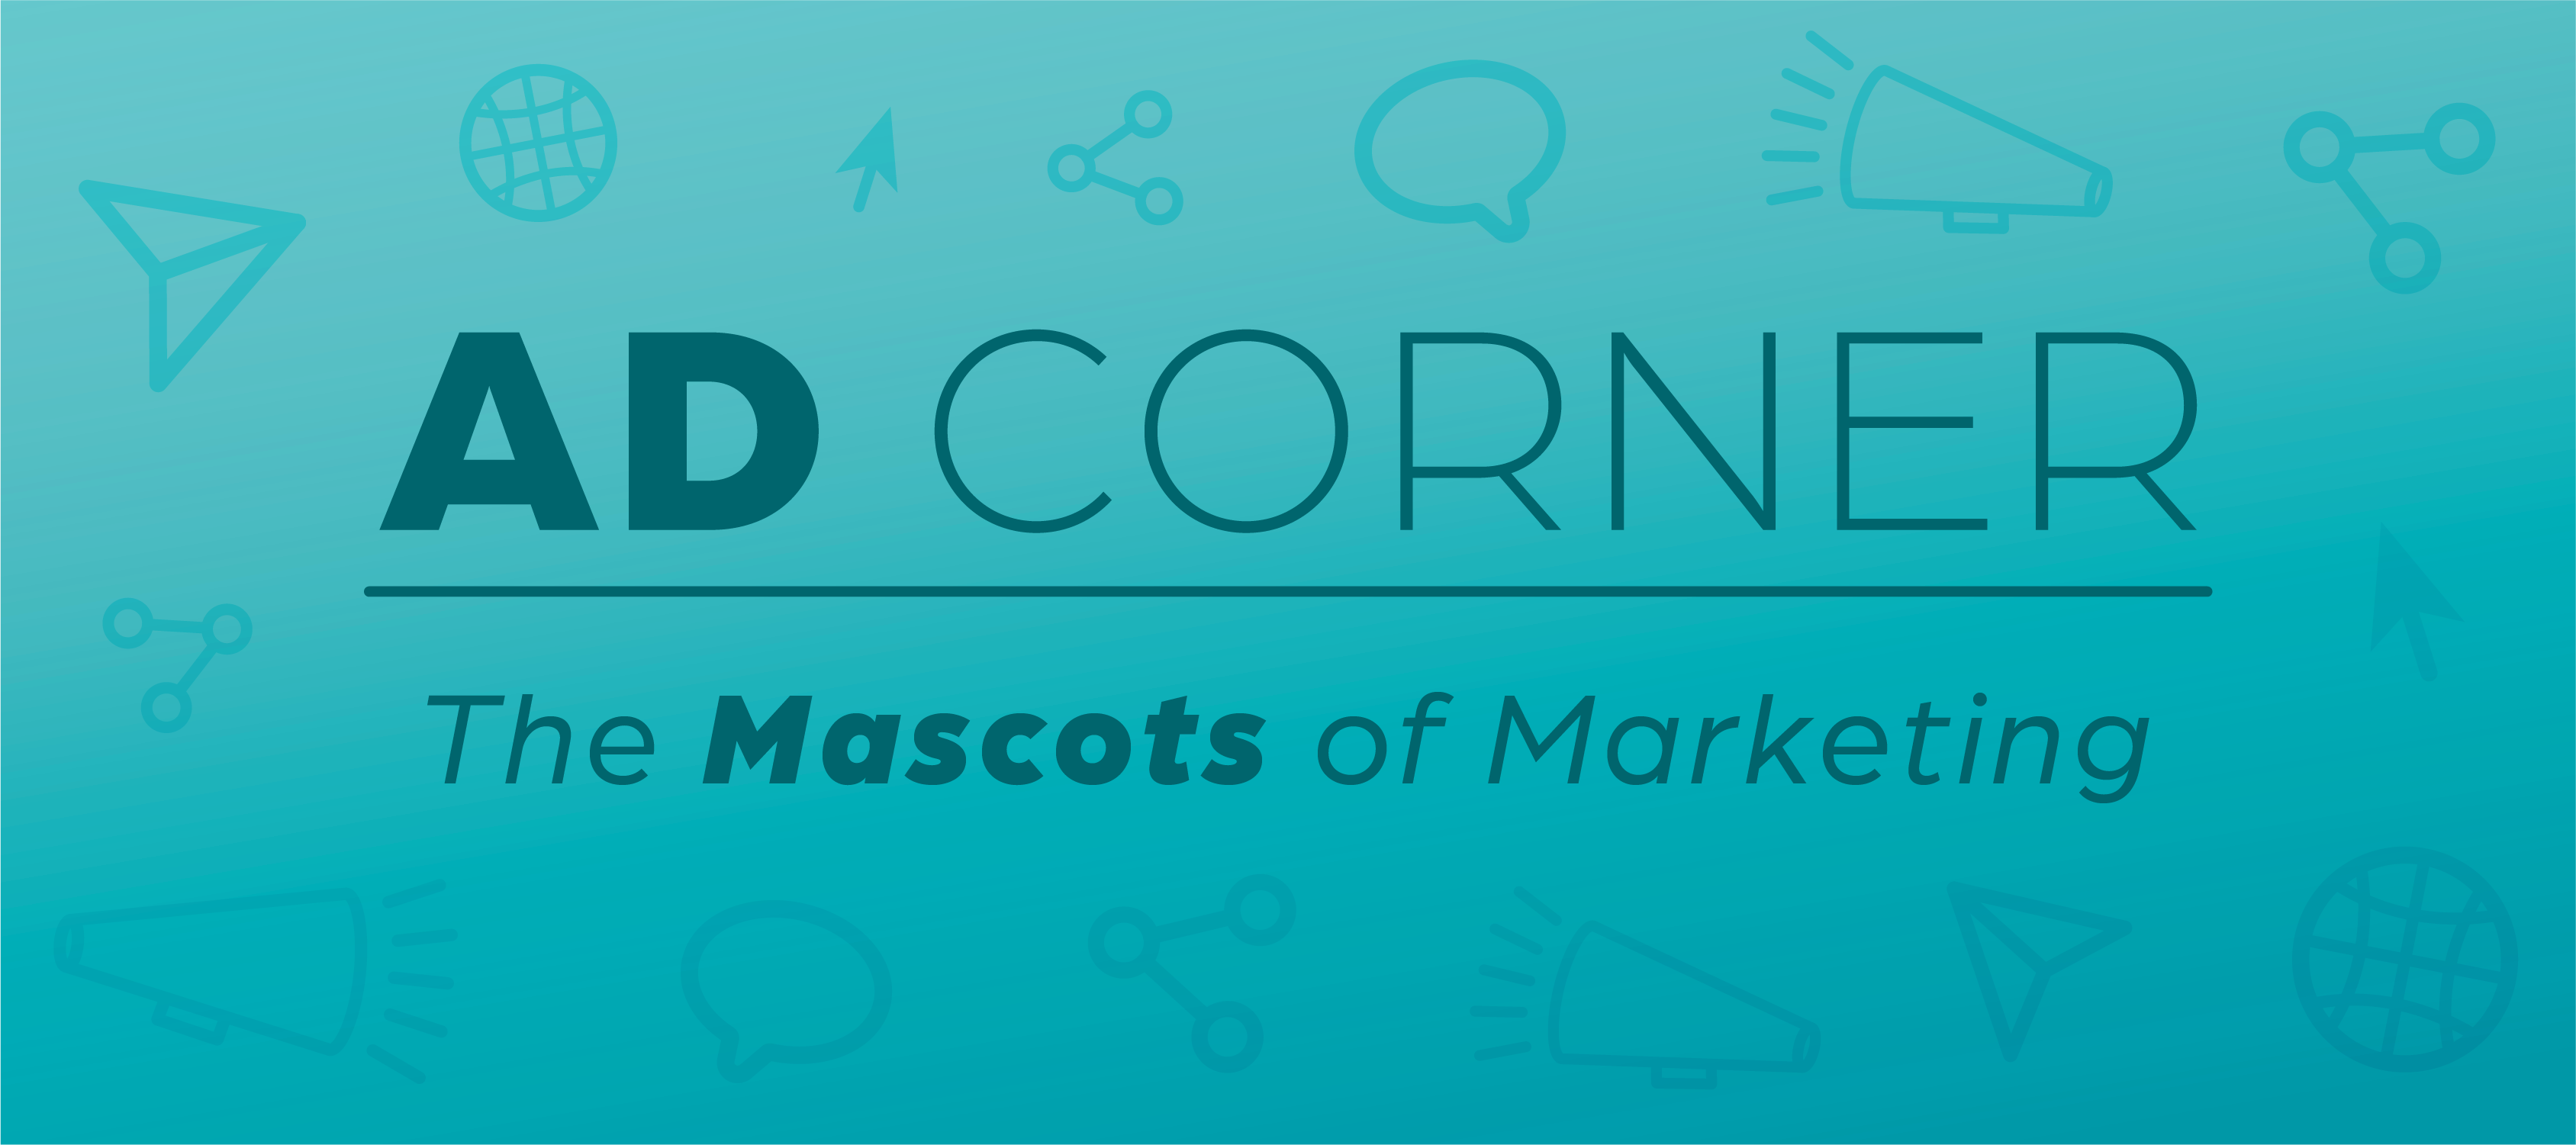 Header image that says "Ad Corner: The Mascots of Marketing"